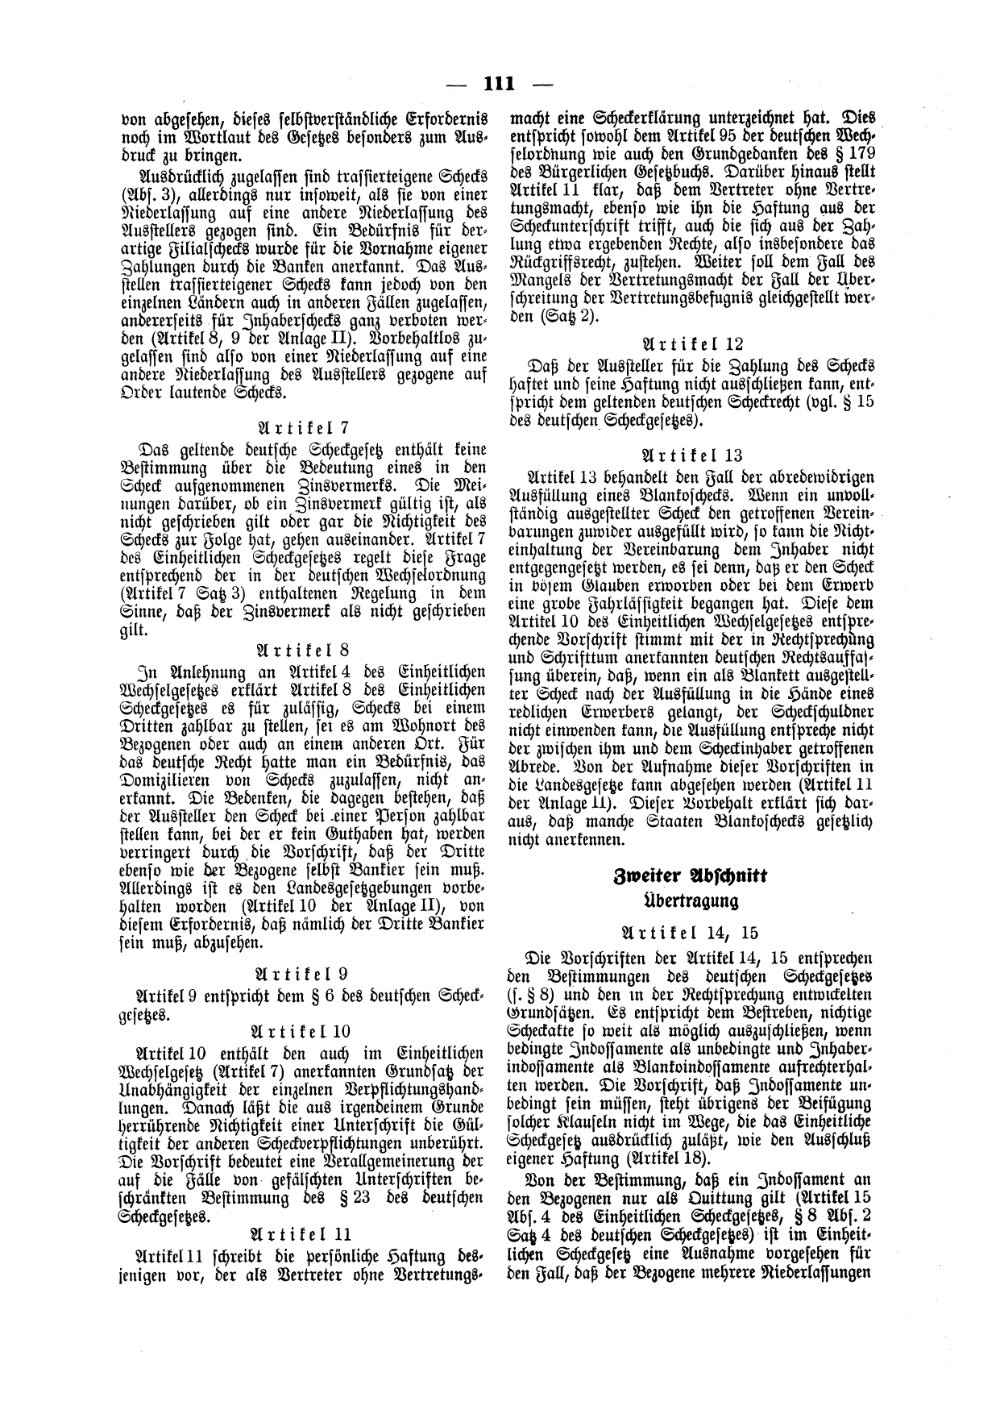 Scan of page 111